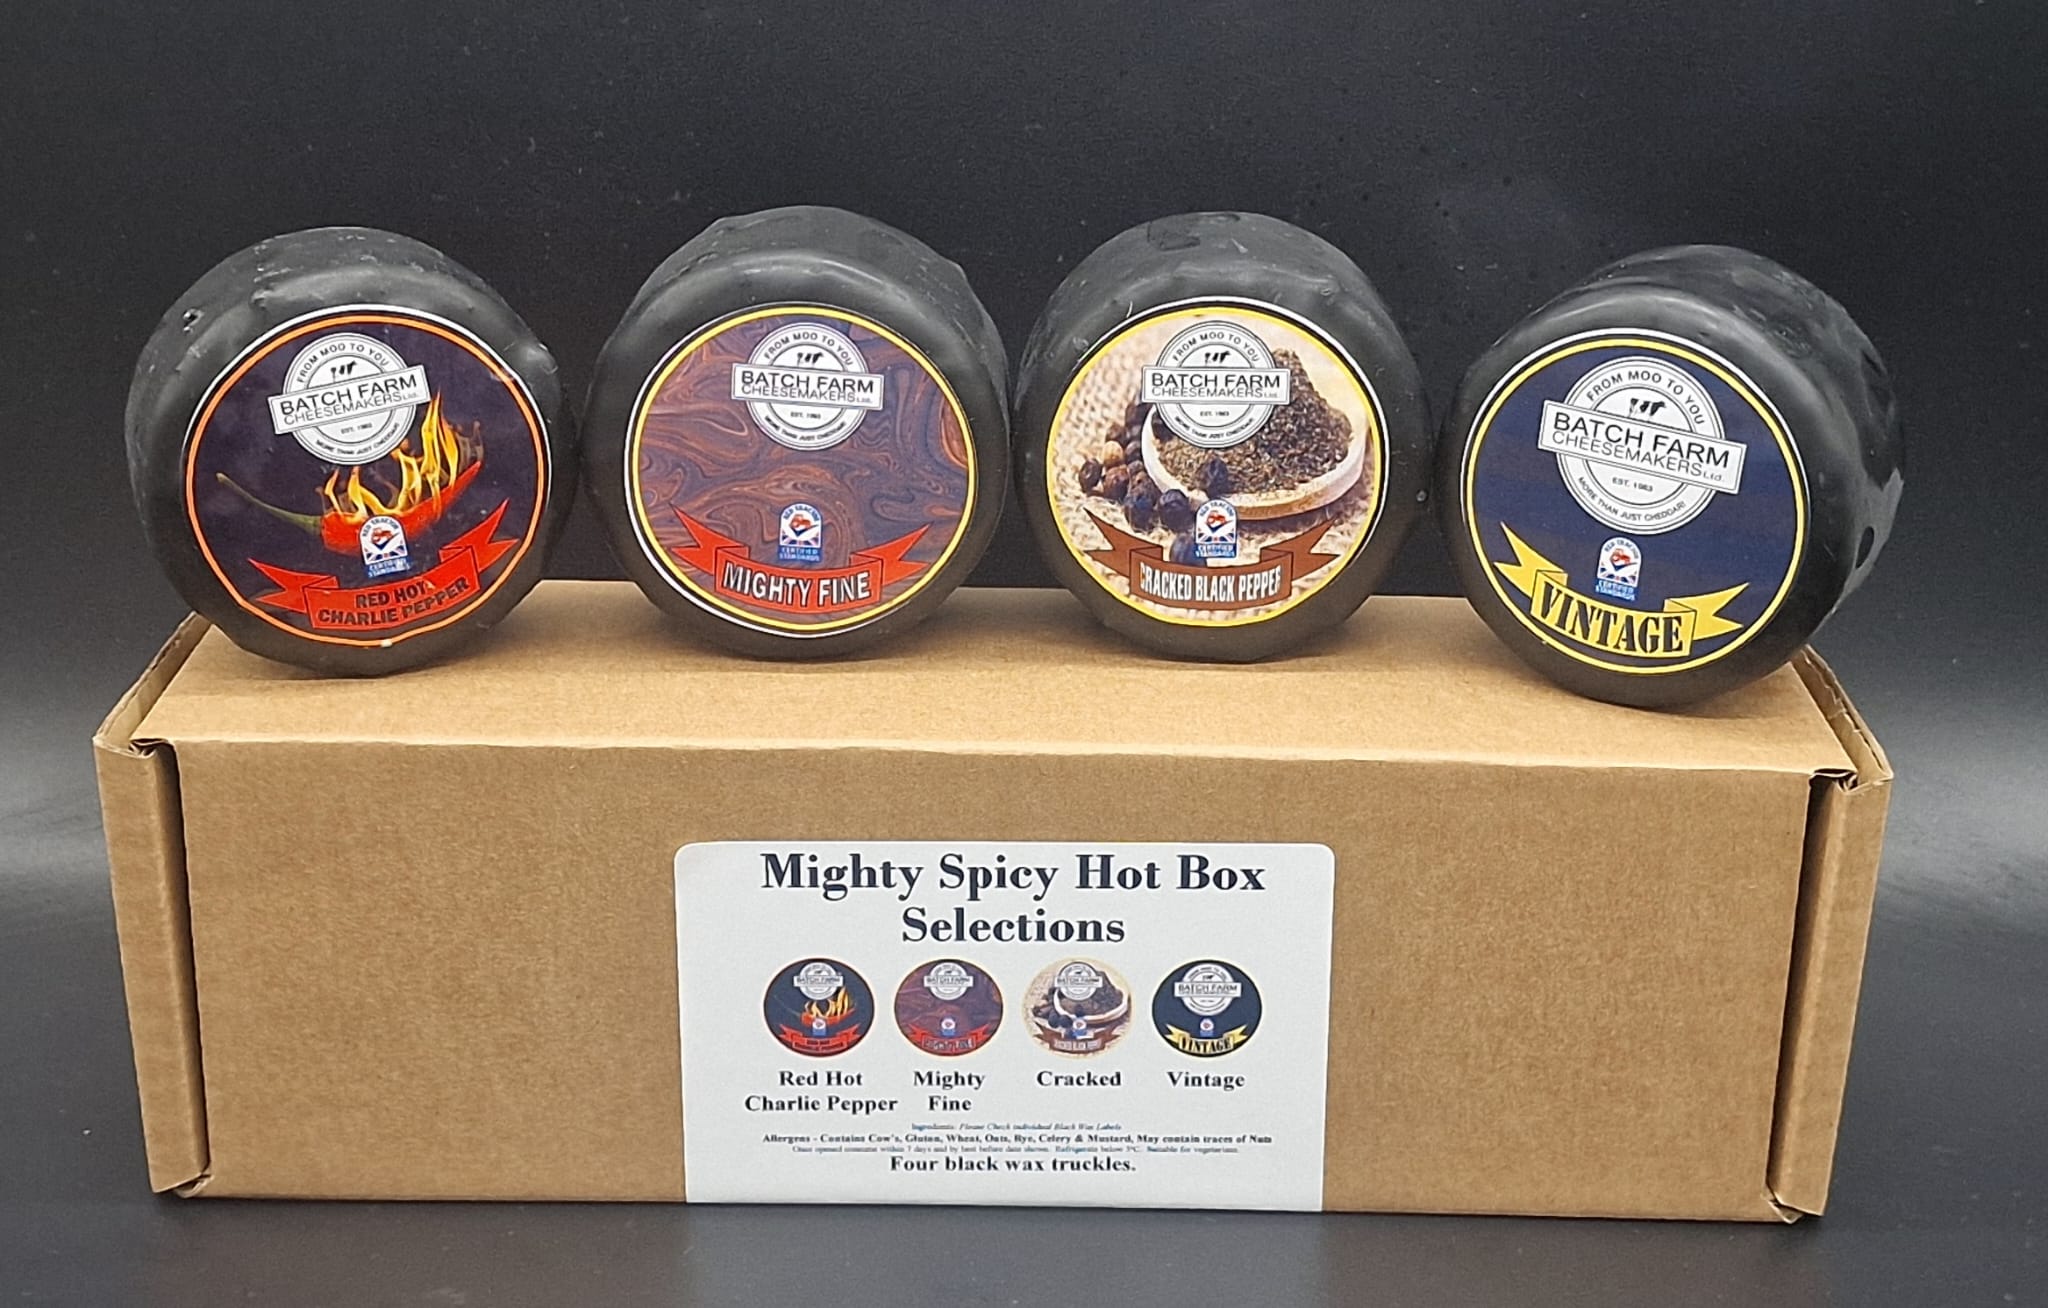 Mighty Spicy Hot Box